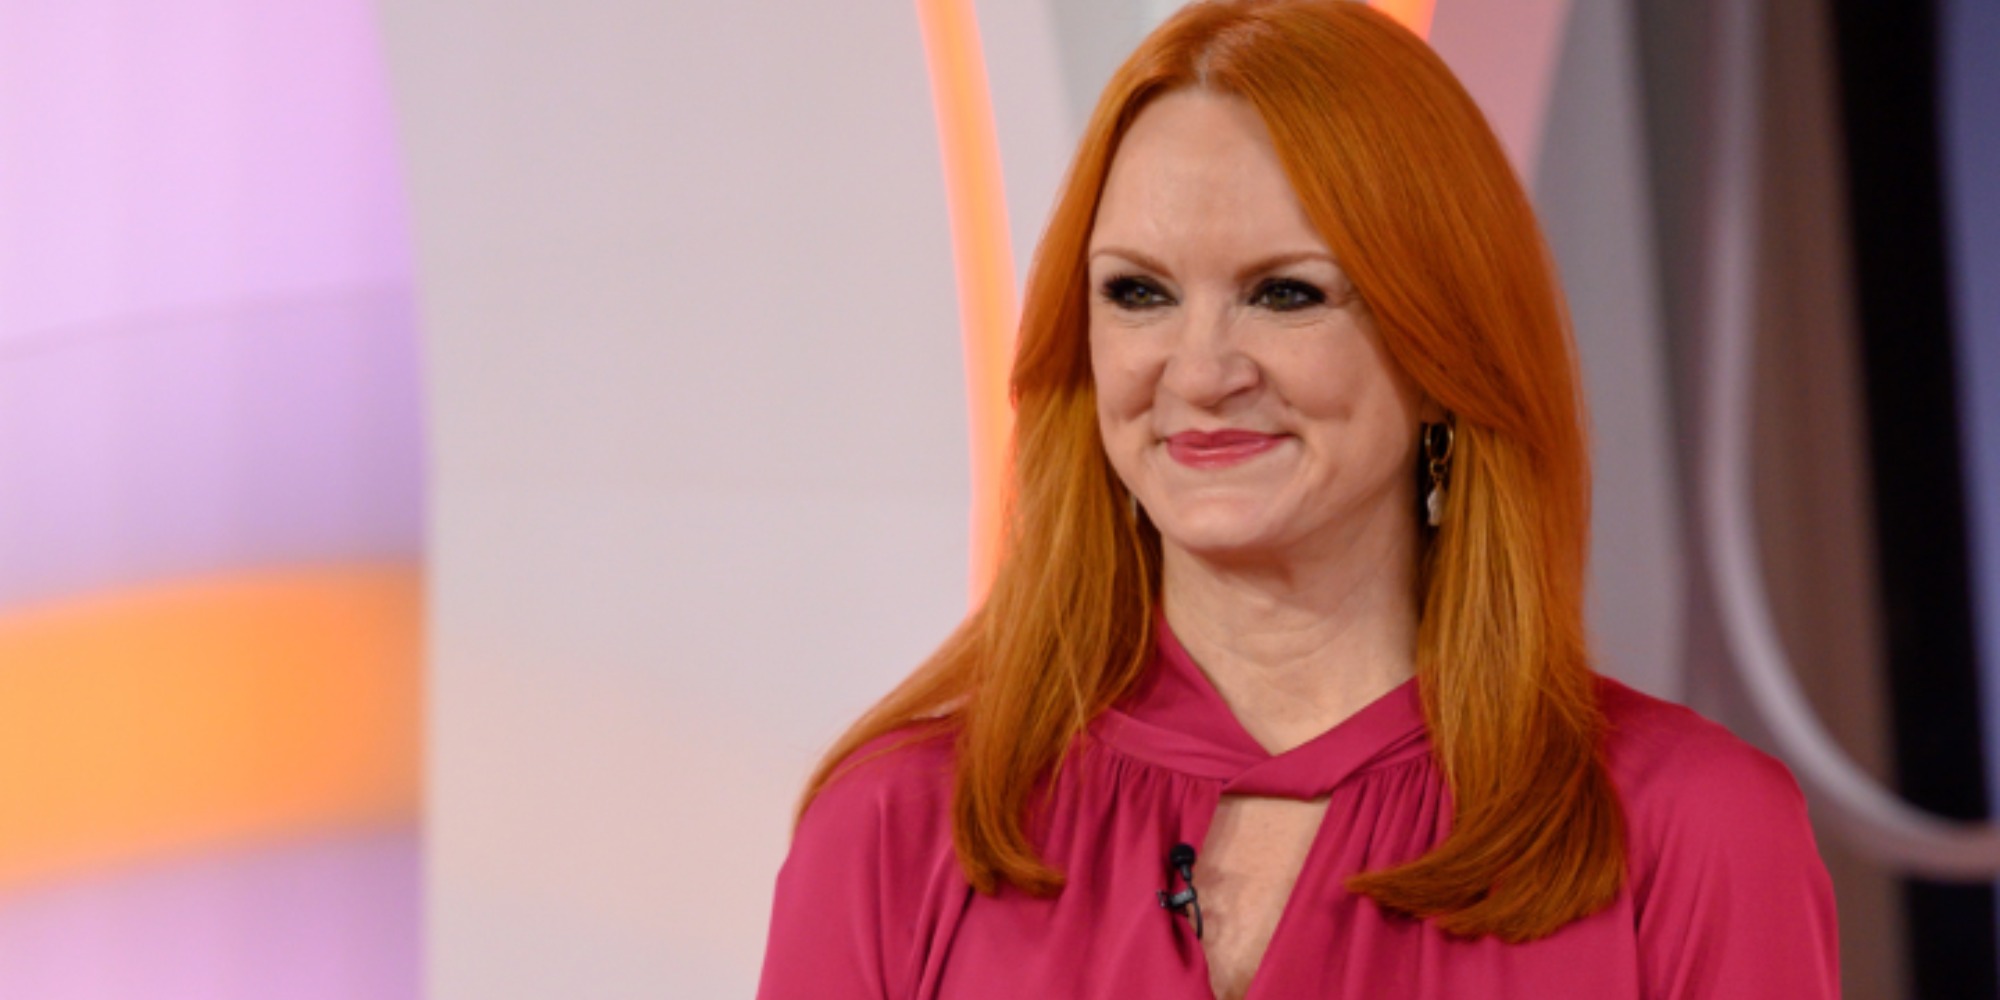 The Pioneer Woman Ree Drummond smiles during an appearance on the Today show while wearing a red shirt.